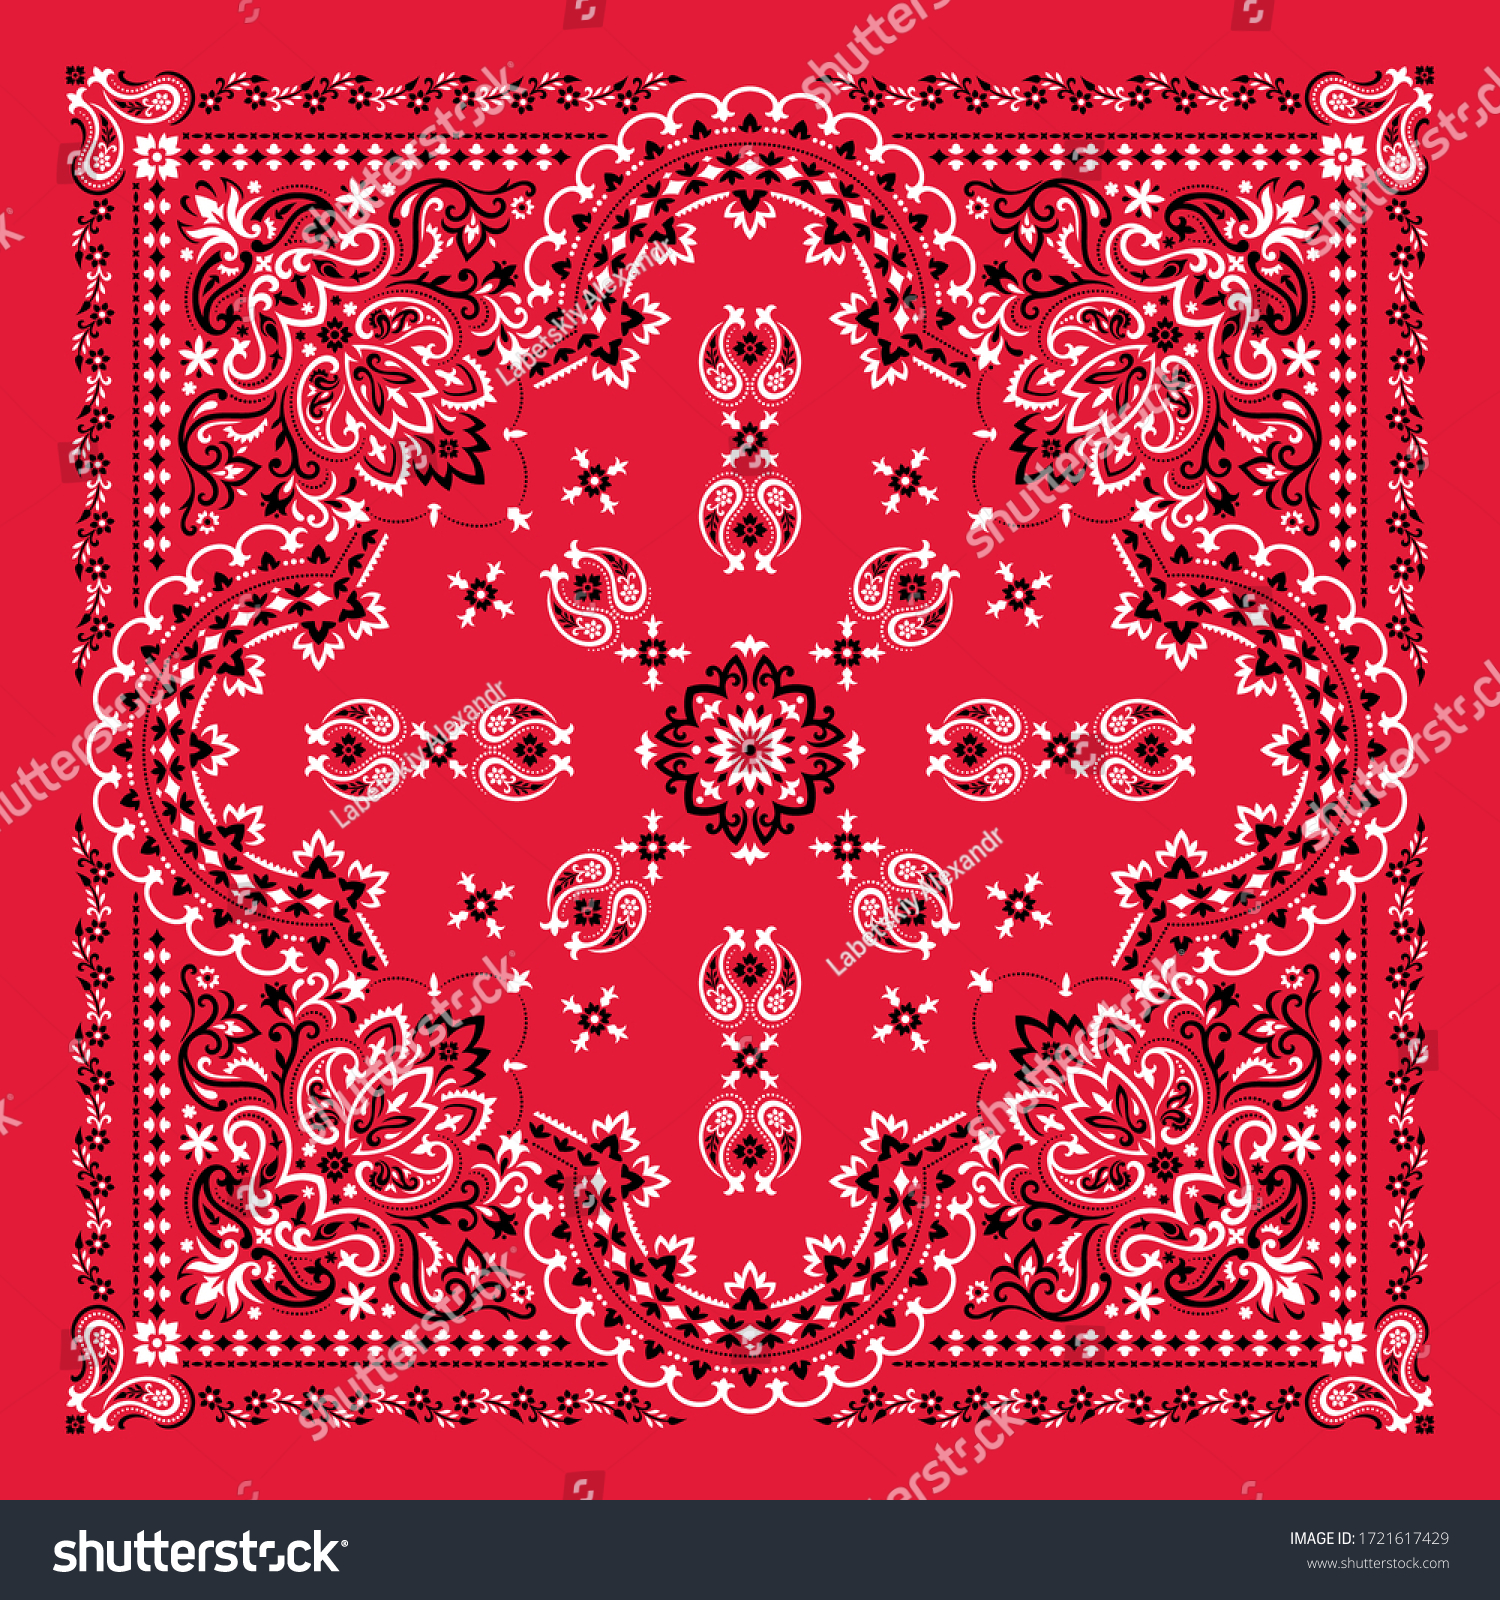 SVG of Vector ornament paisley Bandana Print. Silk neck scarf or kerchief square pattern design style, best motive for print on fabric or papper. svg